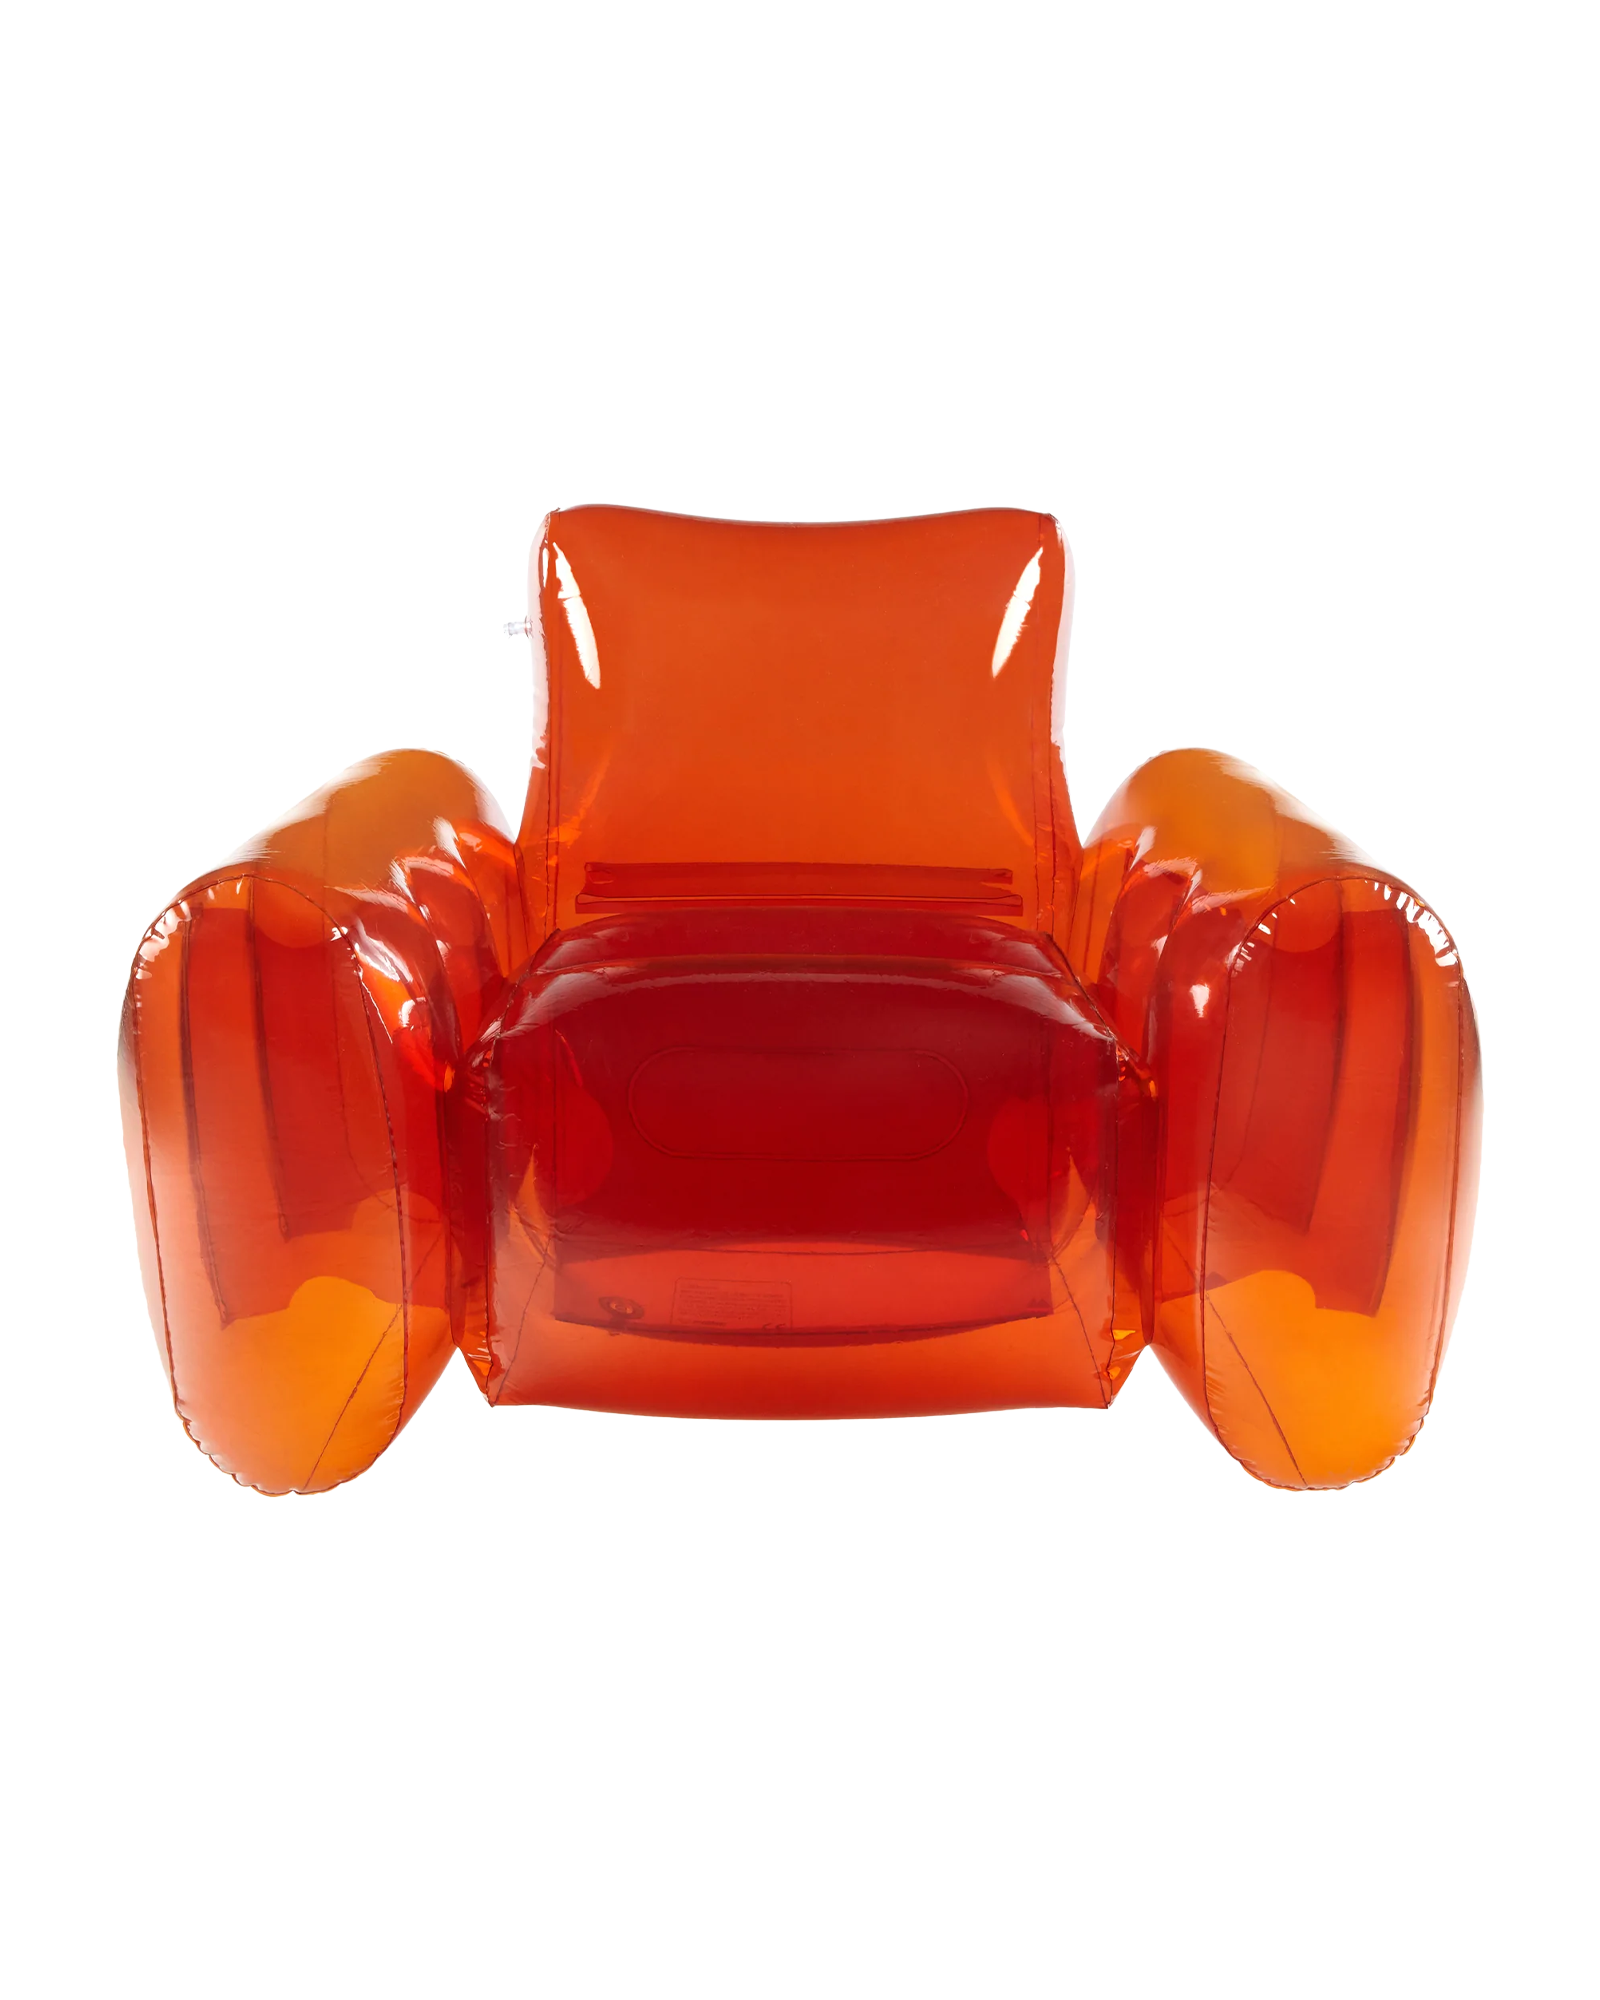 [RENTAL] Inflatable Ego Chair